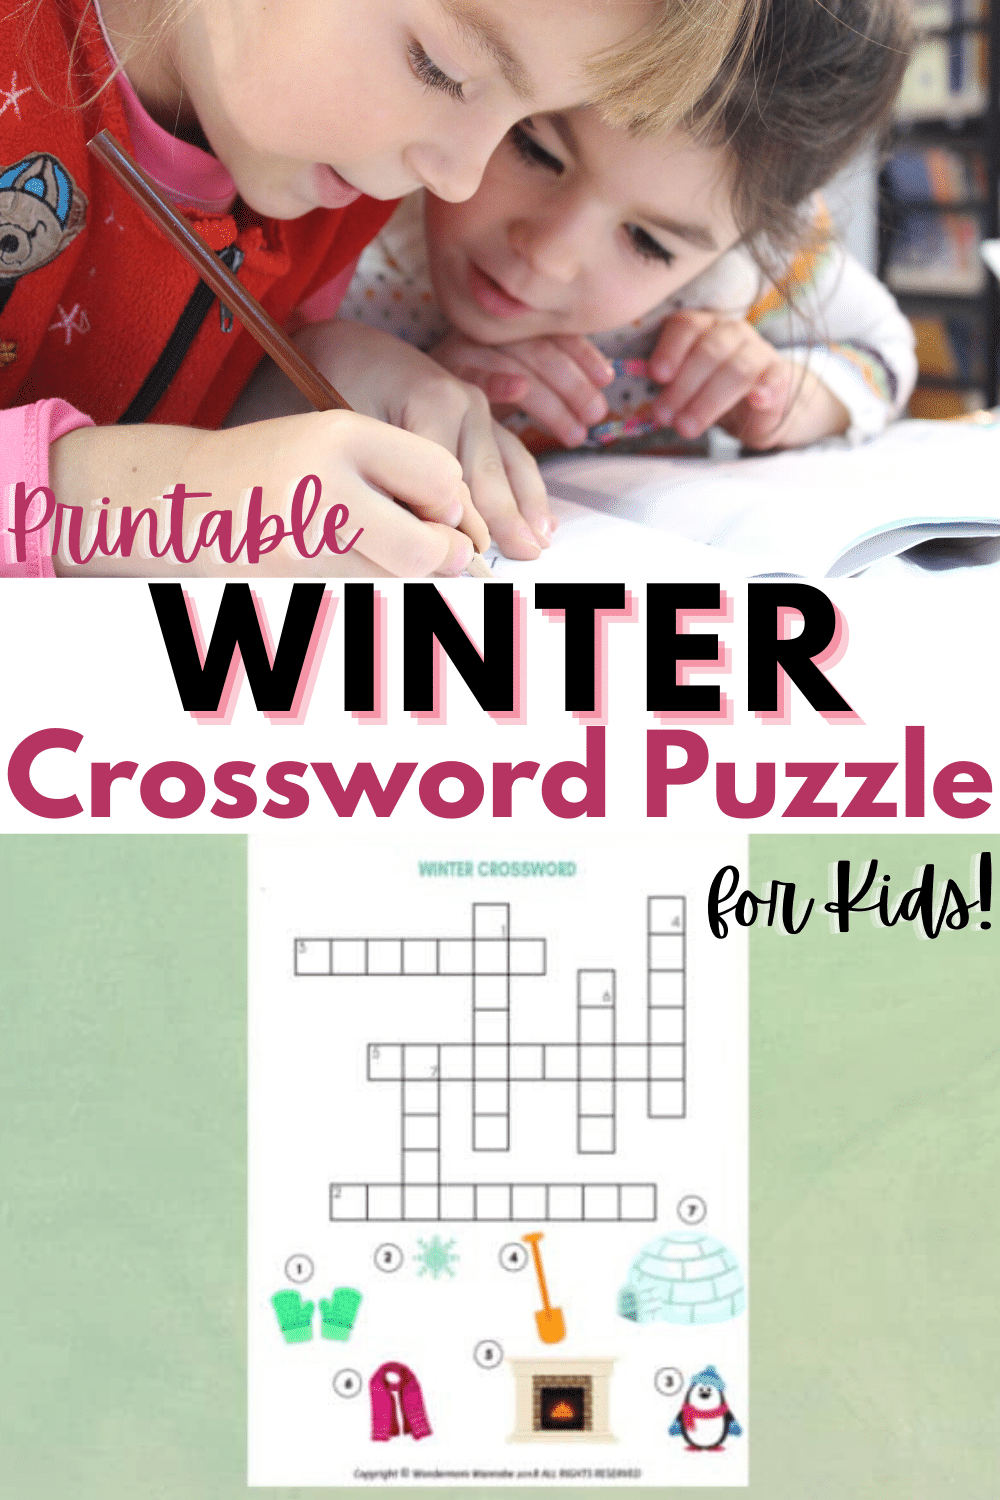 This printable winter crossword puzzle for kids is a great children's activity to complete on those cold winter days when staying indoors is required. #crosswordpuzzle #printables #winter via @wondermomwannab